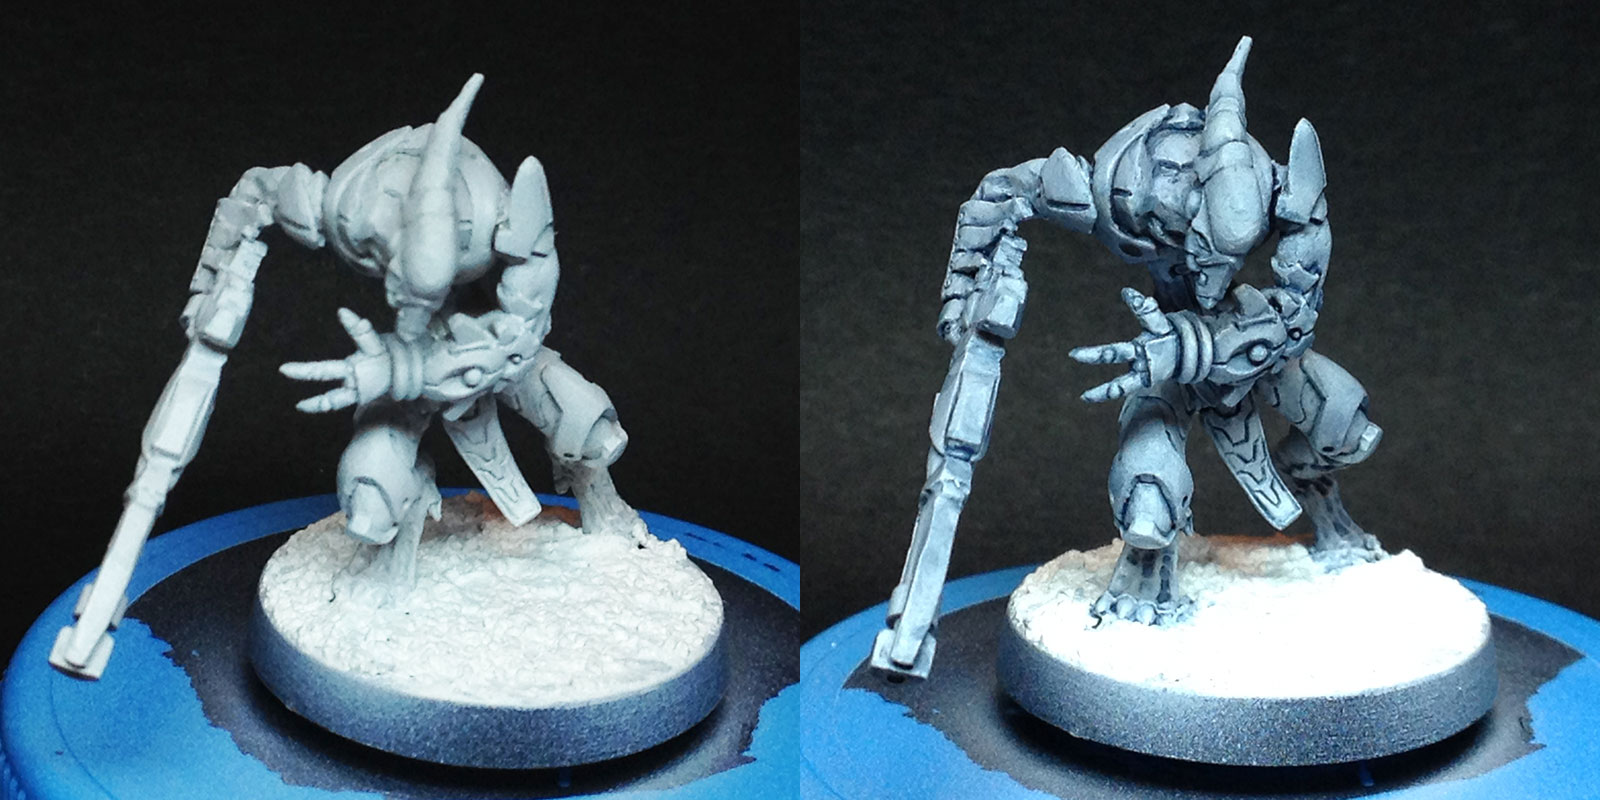 Comparing New Nuln Oil & Agrax Shades Side By Side Pictures 